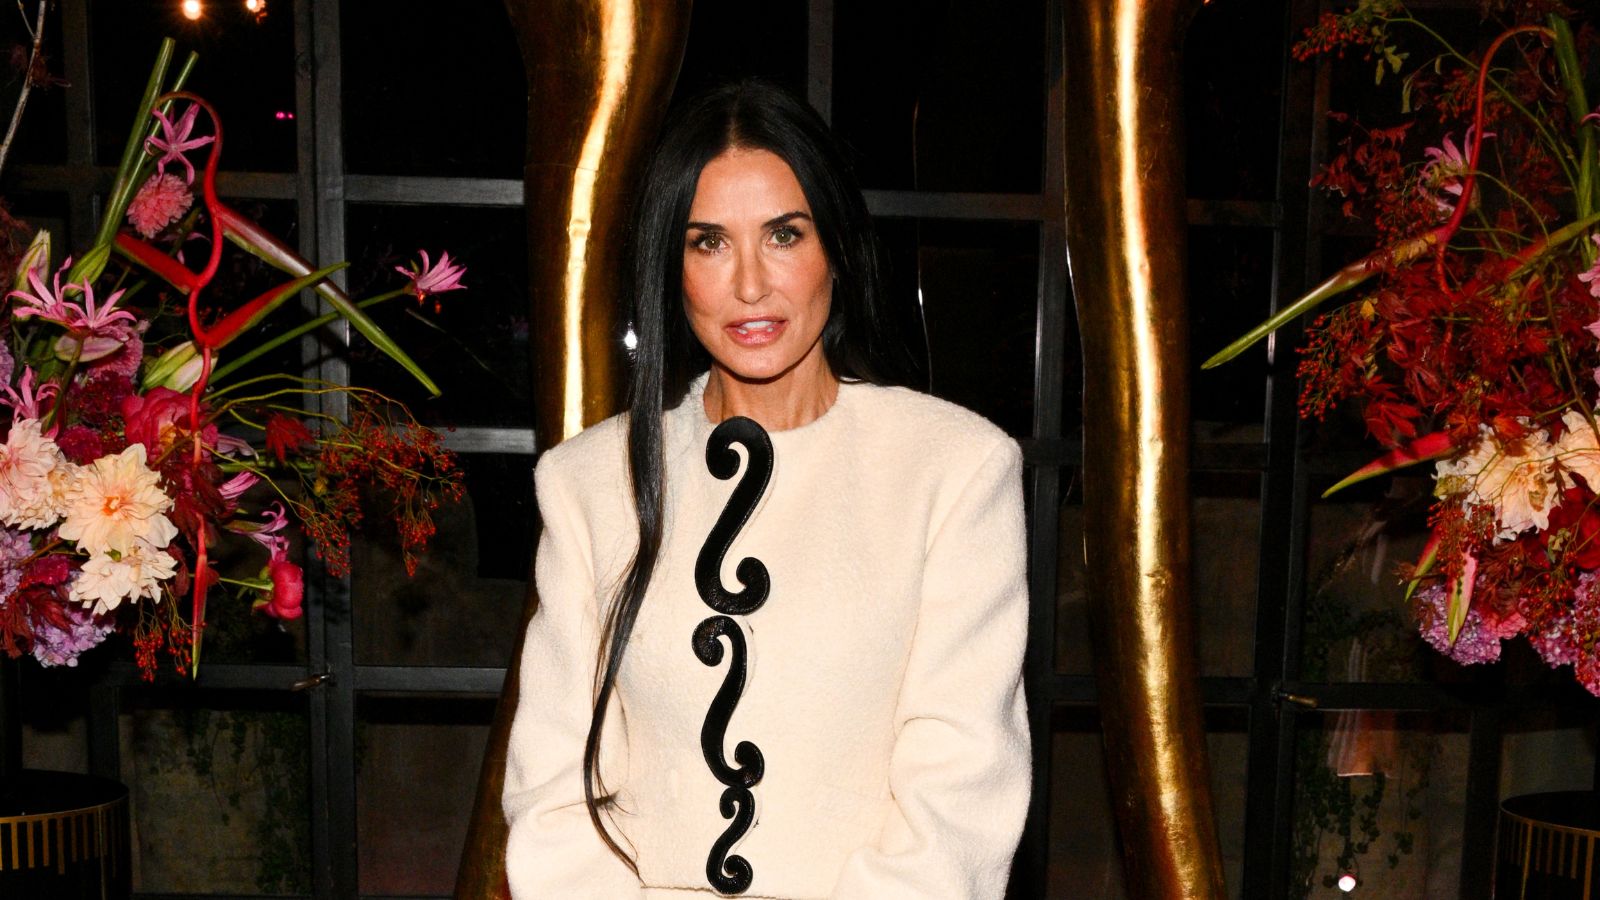 We're obsessed with Demi Moore's striking monochrome co-ord | Woman & Home